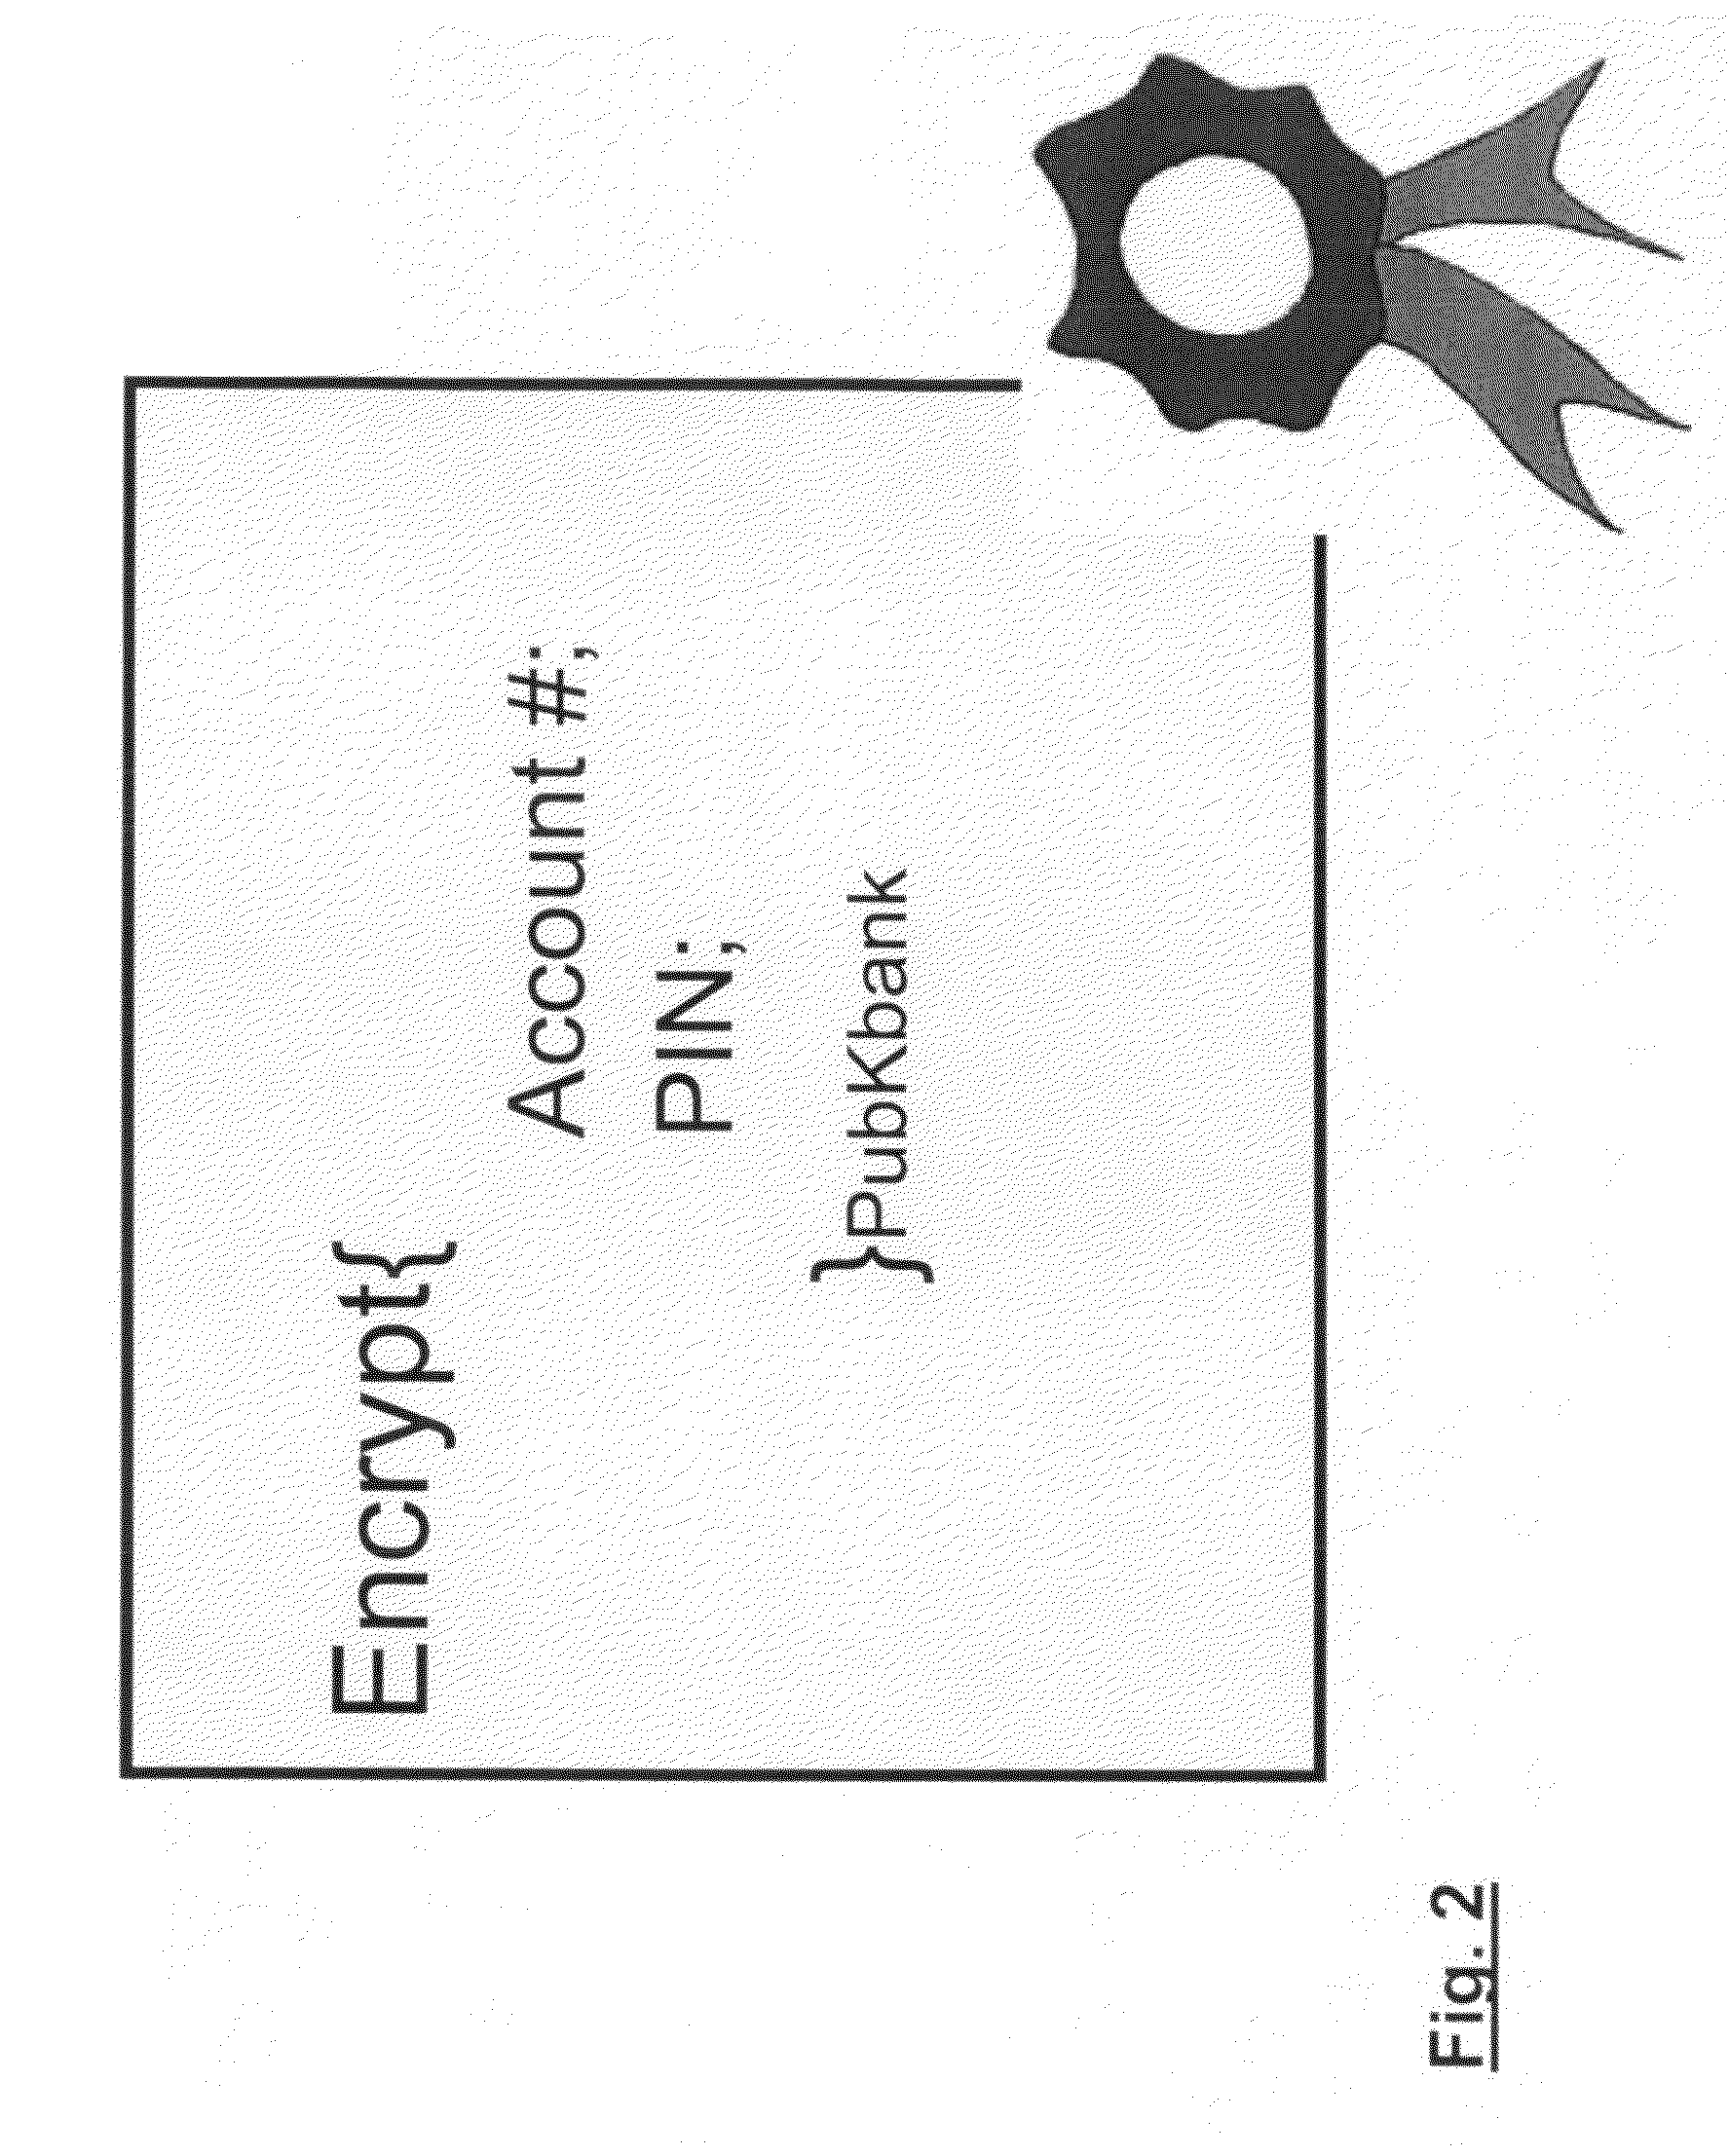 Method and apparatus for performing delegated transactions